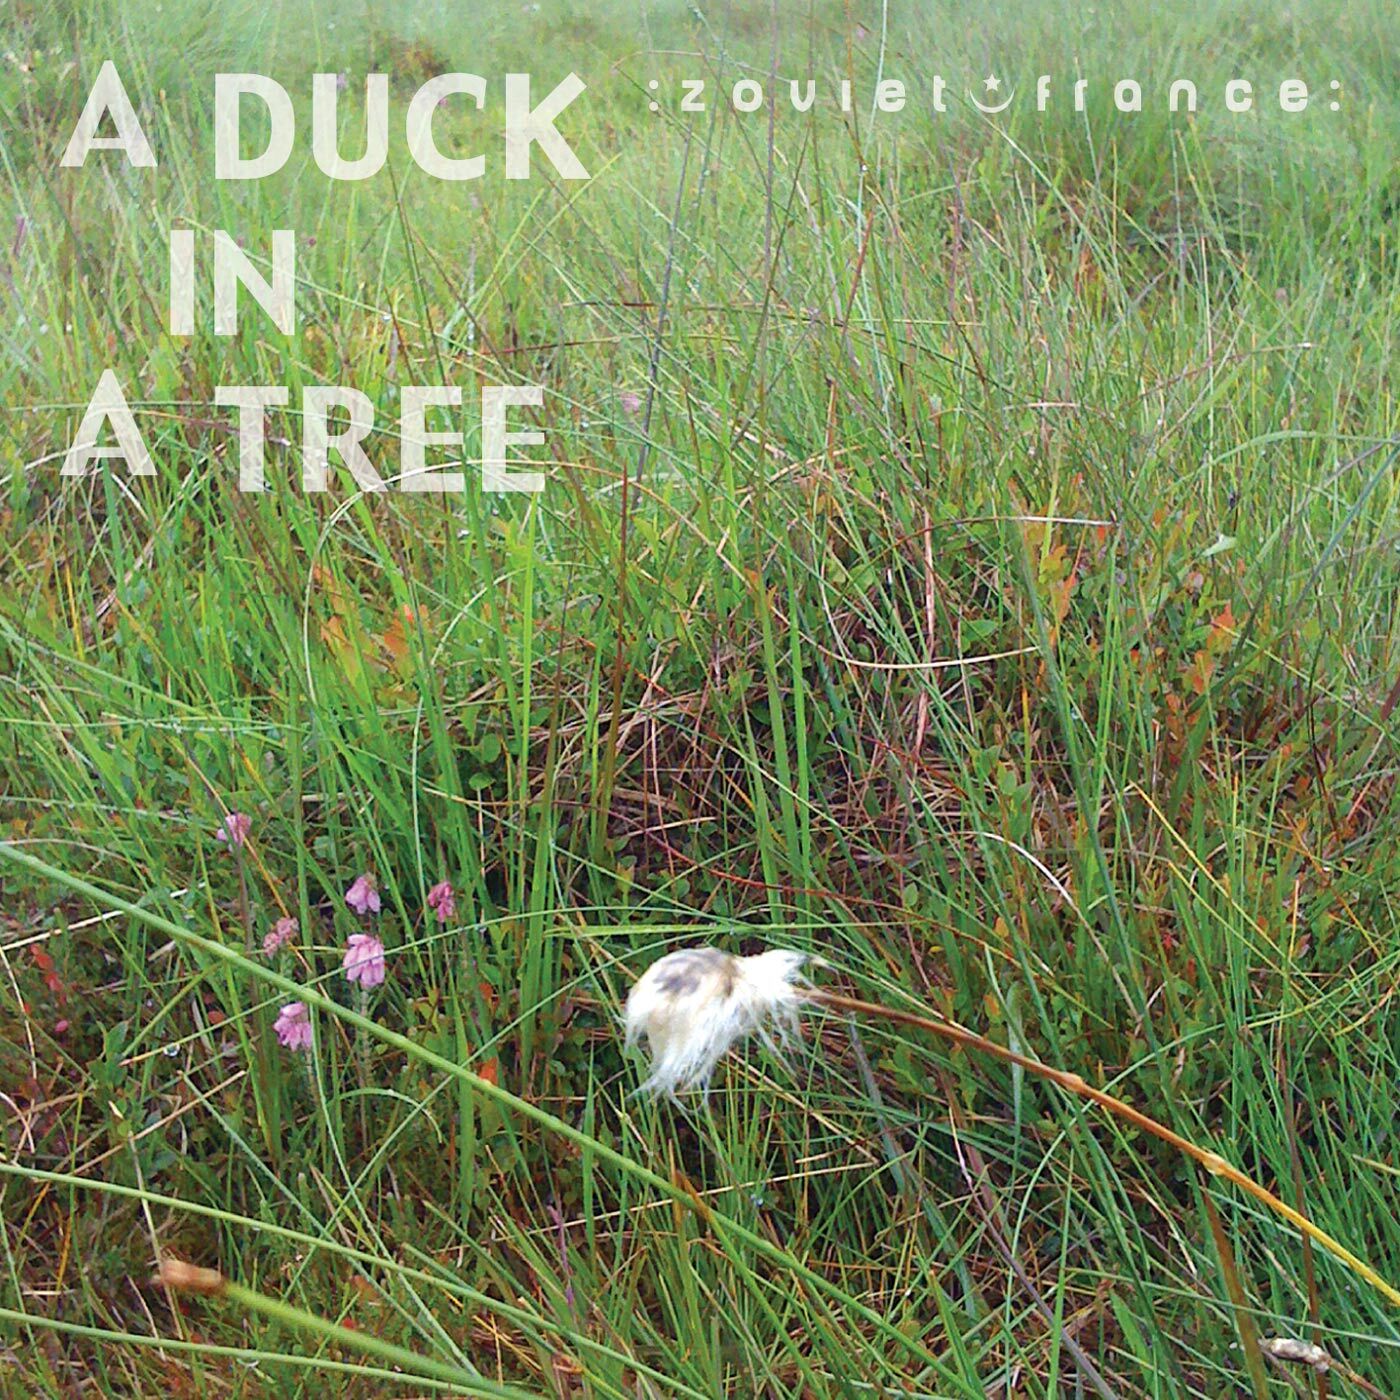 A-Duck-in-a-Tree-2013-03-16-_-Dust-at-Dusk-layout-1400.jpg